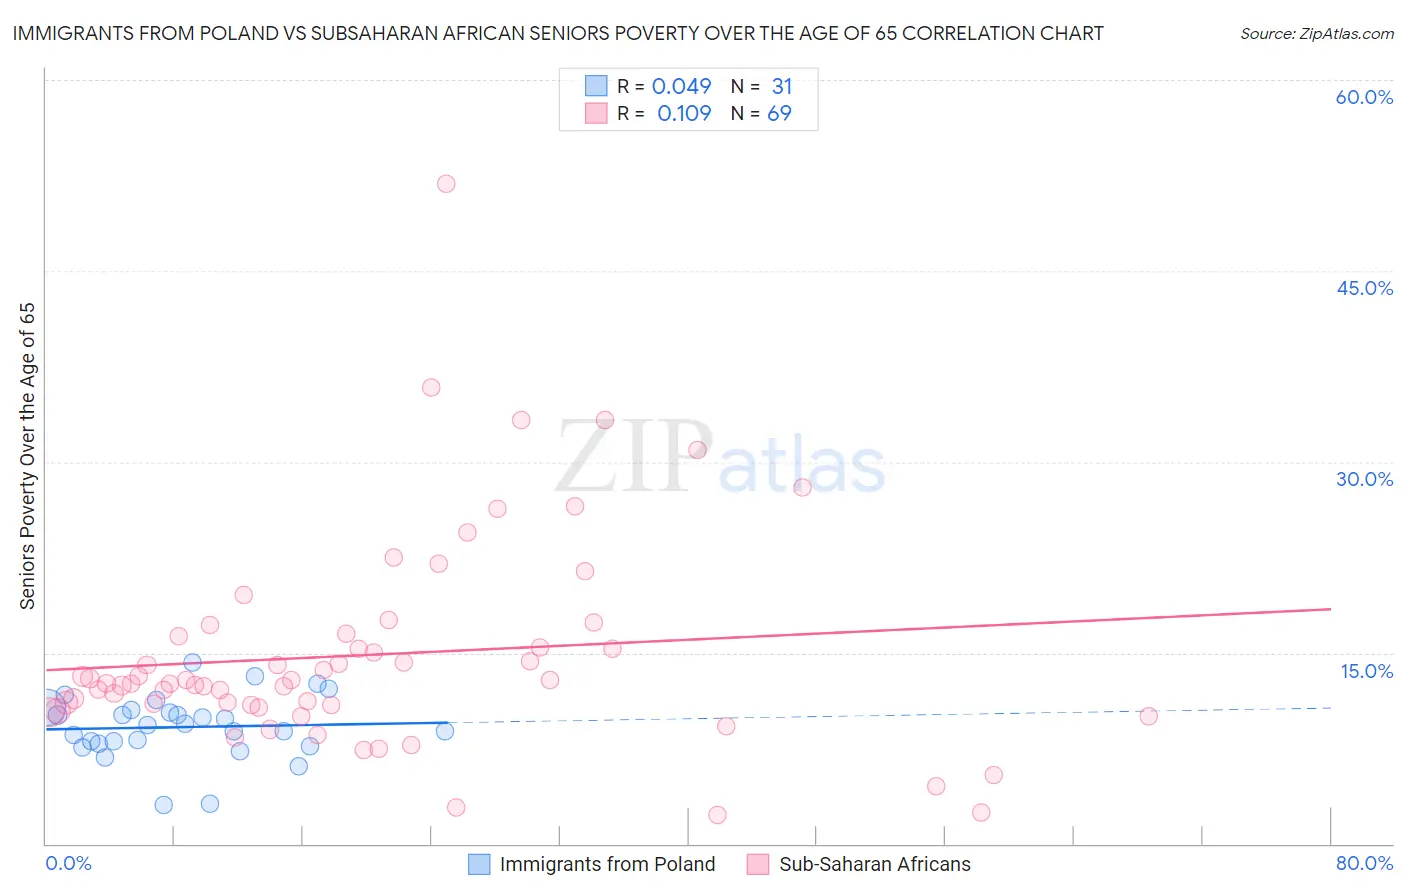 Immigrants from Poland vs Subsaharan African Seniors Poverty Over the Age of 65